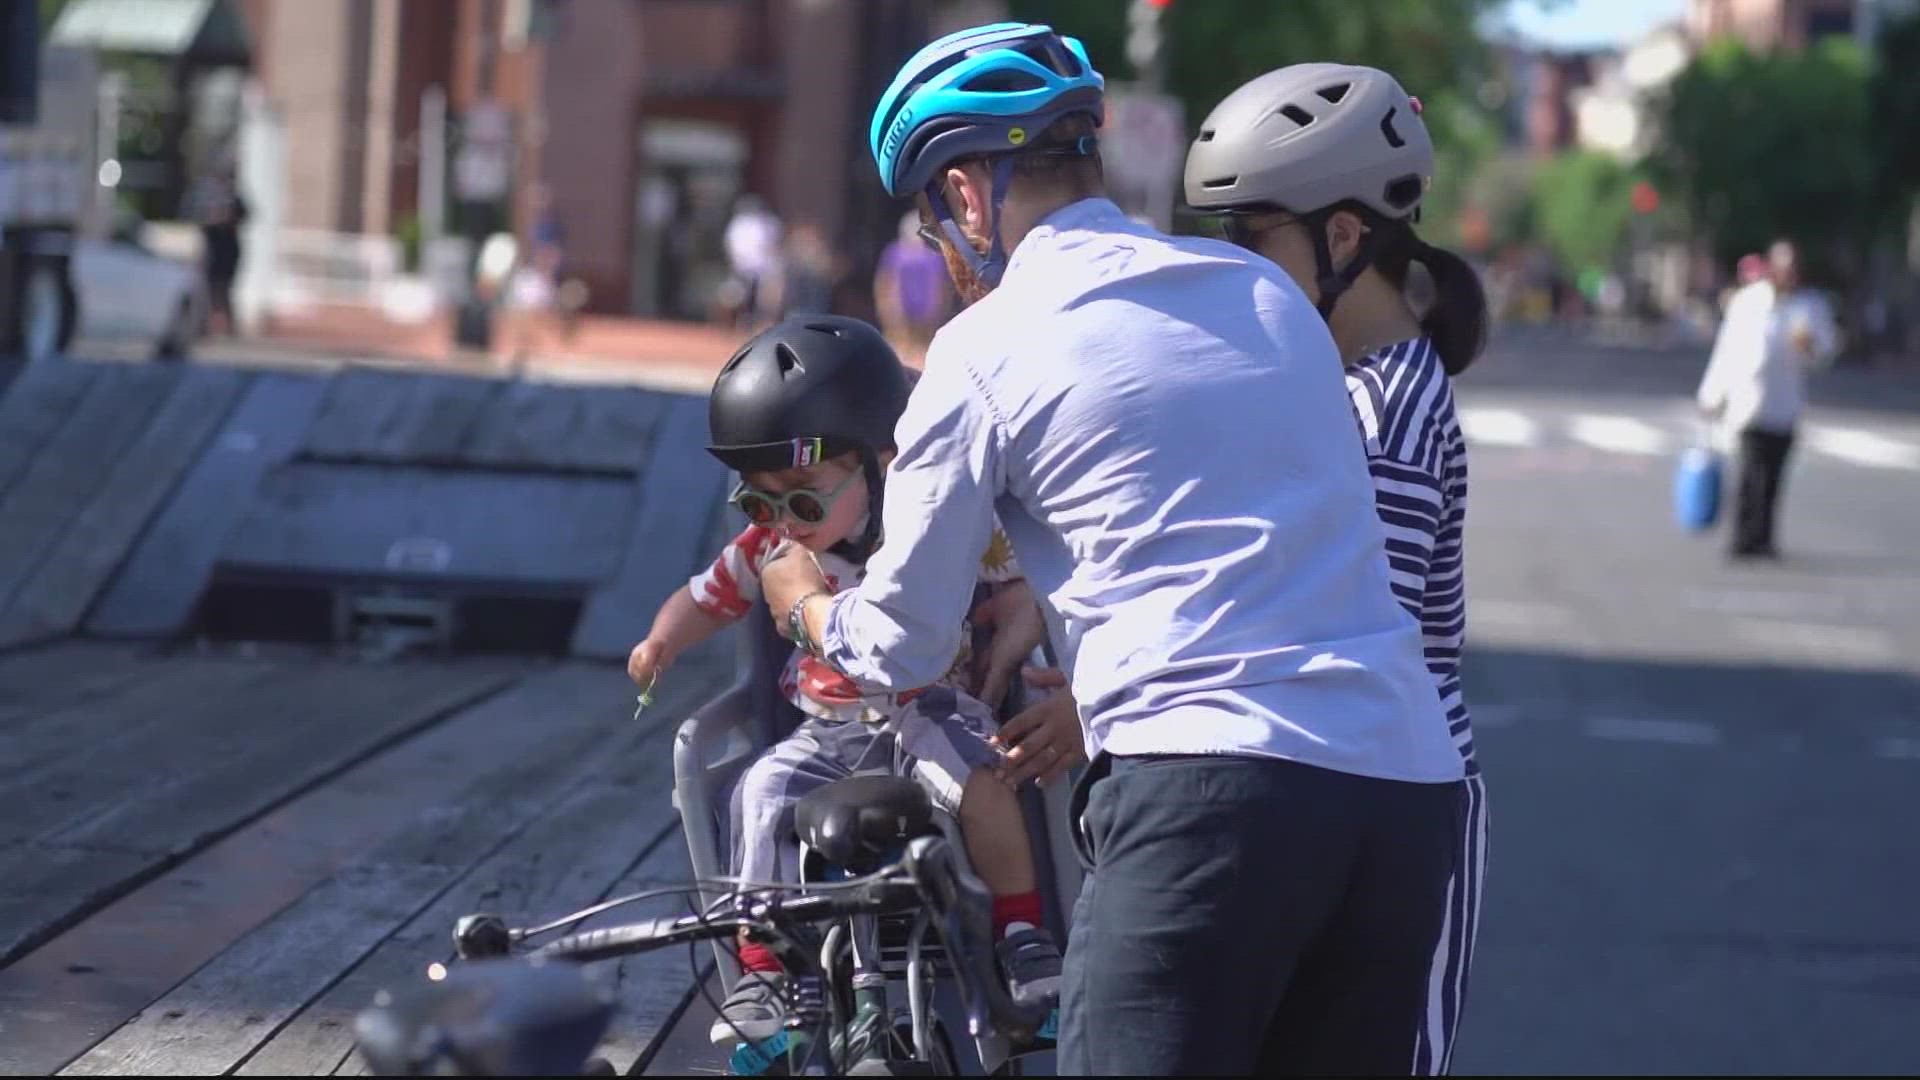 Open Streets aims to temporarily close roadways to motorists in order to provide safe spaces for walking, biking, skating and other activities.